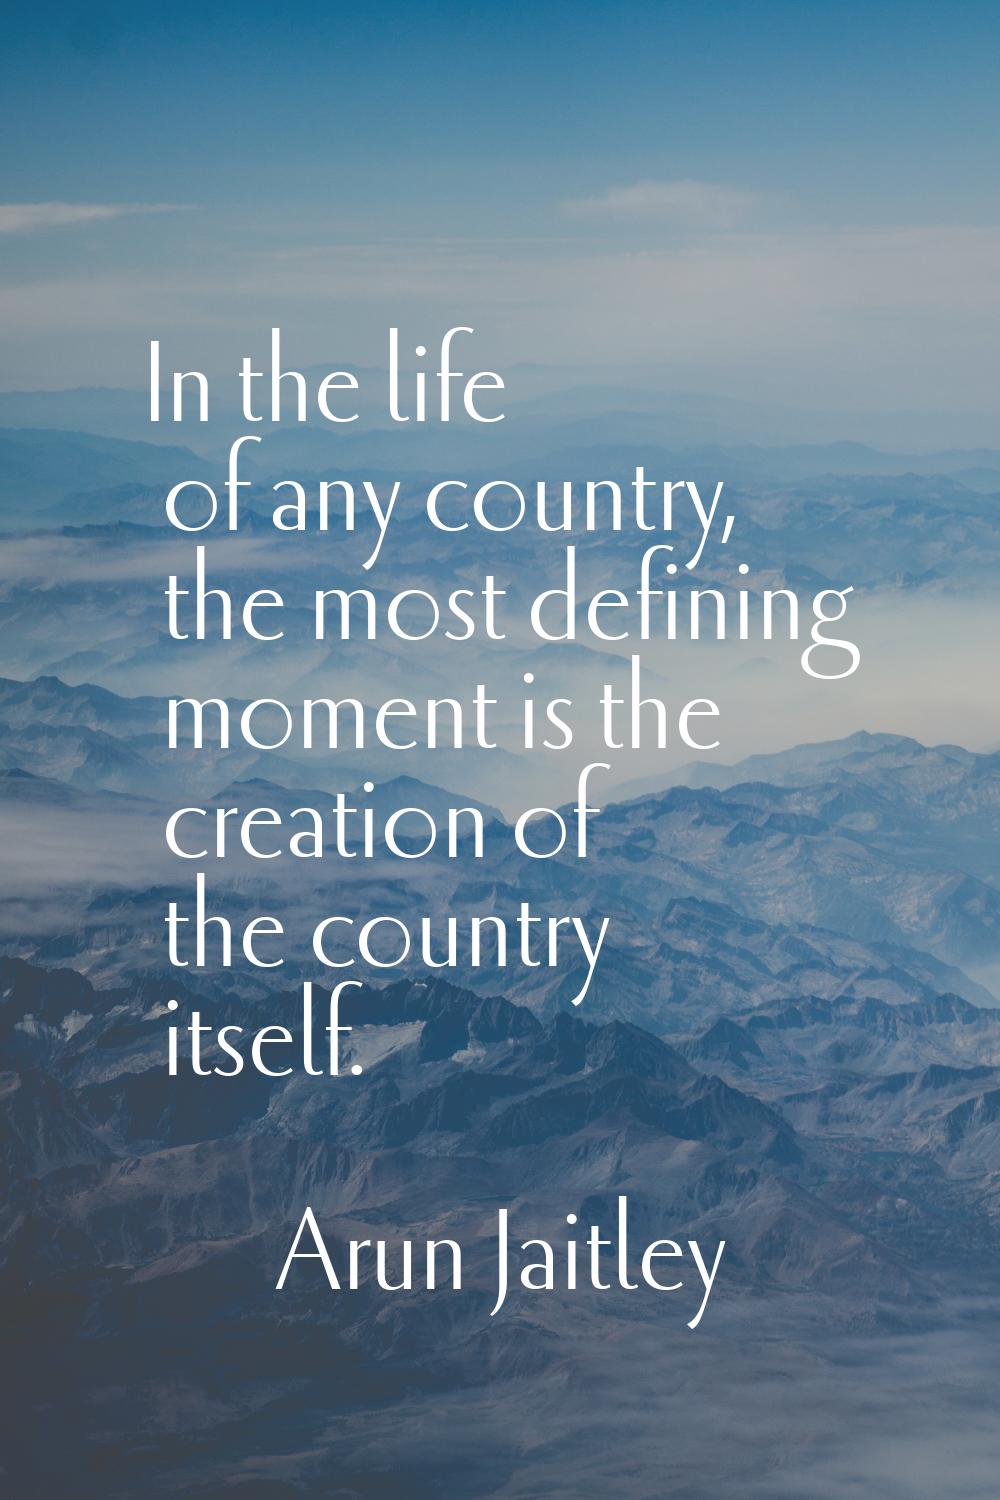 In the life of any country, the most defining moment is the creation of the country itself.